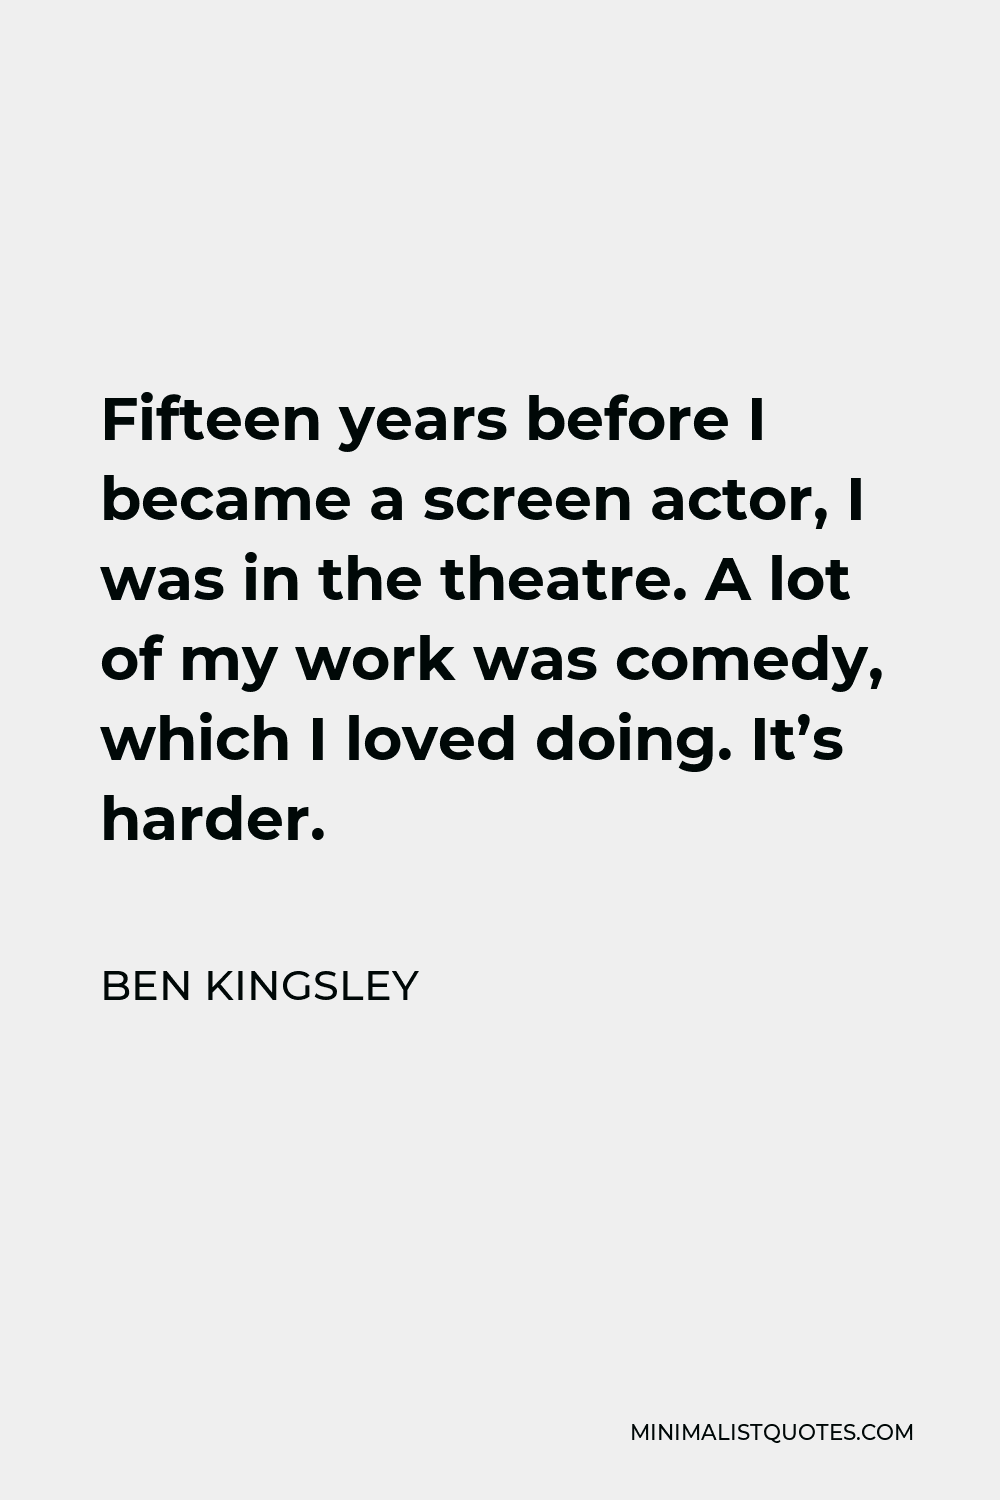 Ben Kingsley Quote - Fifteen years before I became a screen actor, I was in the theatre. A lot of my work was comedy, which I loved doing. It’s harder.